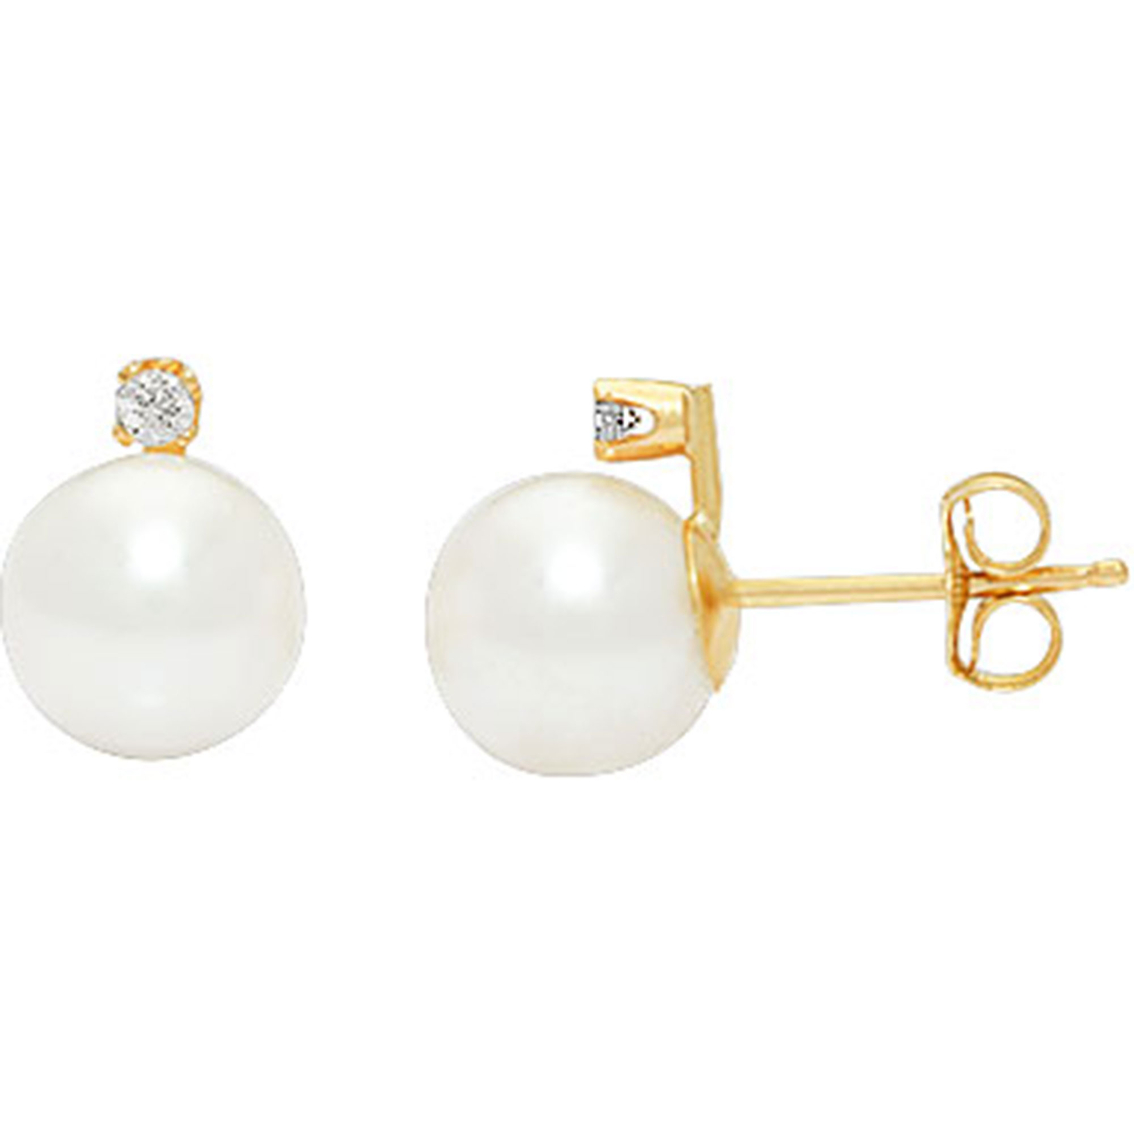 14K Yellow Gold 6.5-7mm Cultured Akoya Pearl Earrings with Diamond Accents - Image 2 of 2